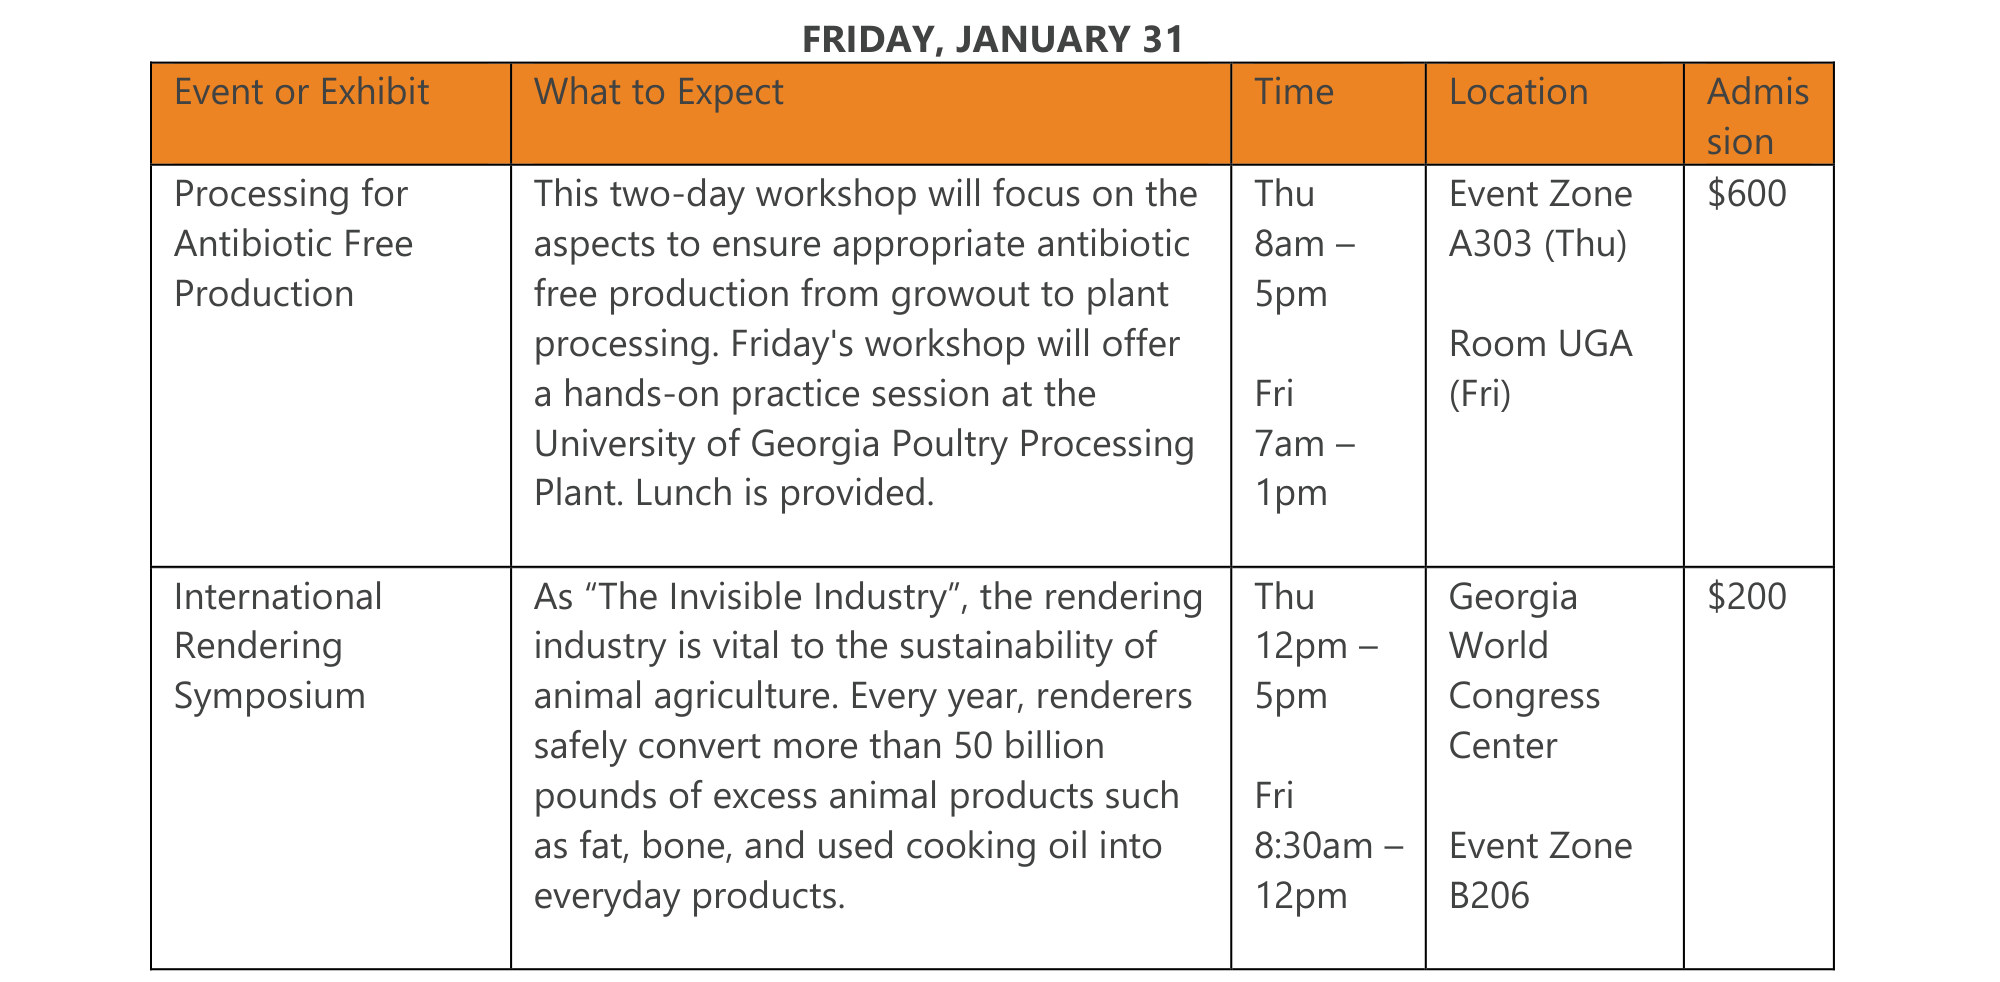 IPPE Events Calendar - Friday